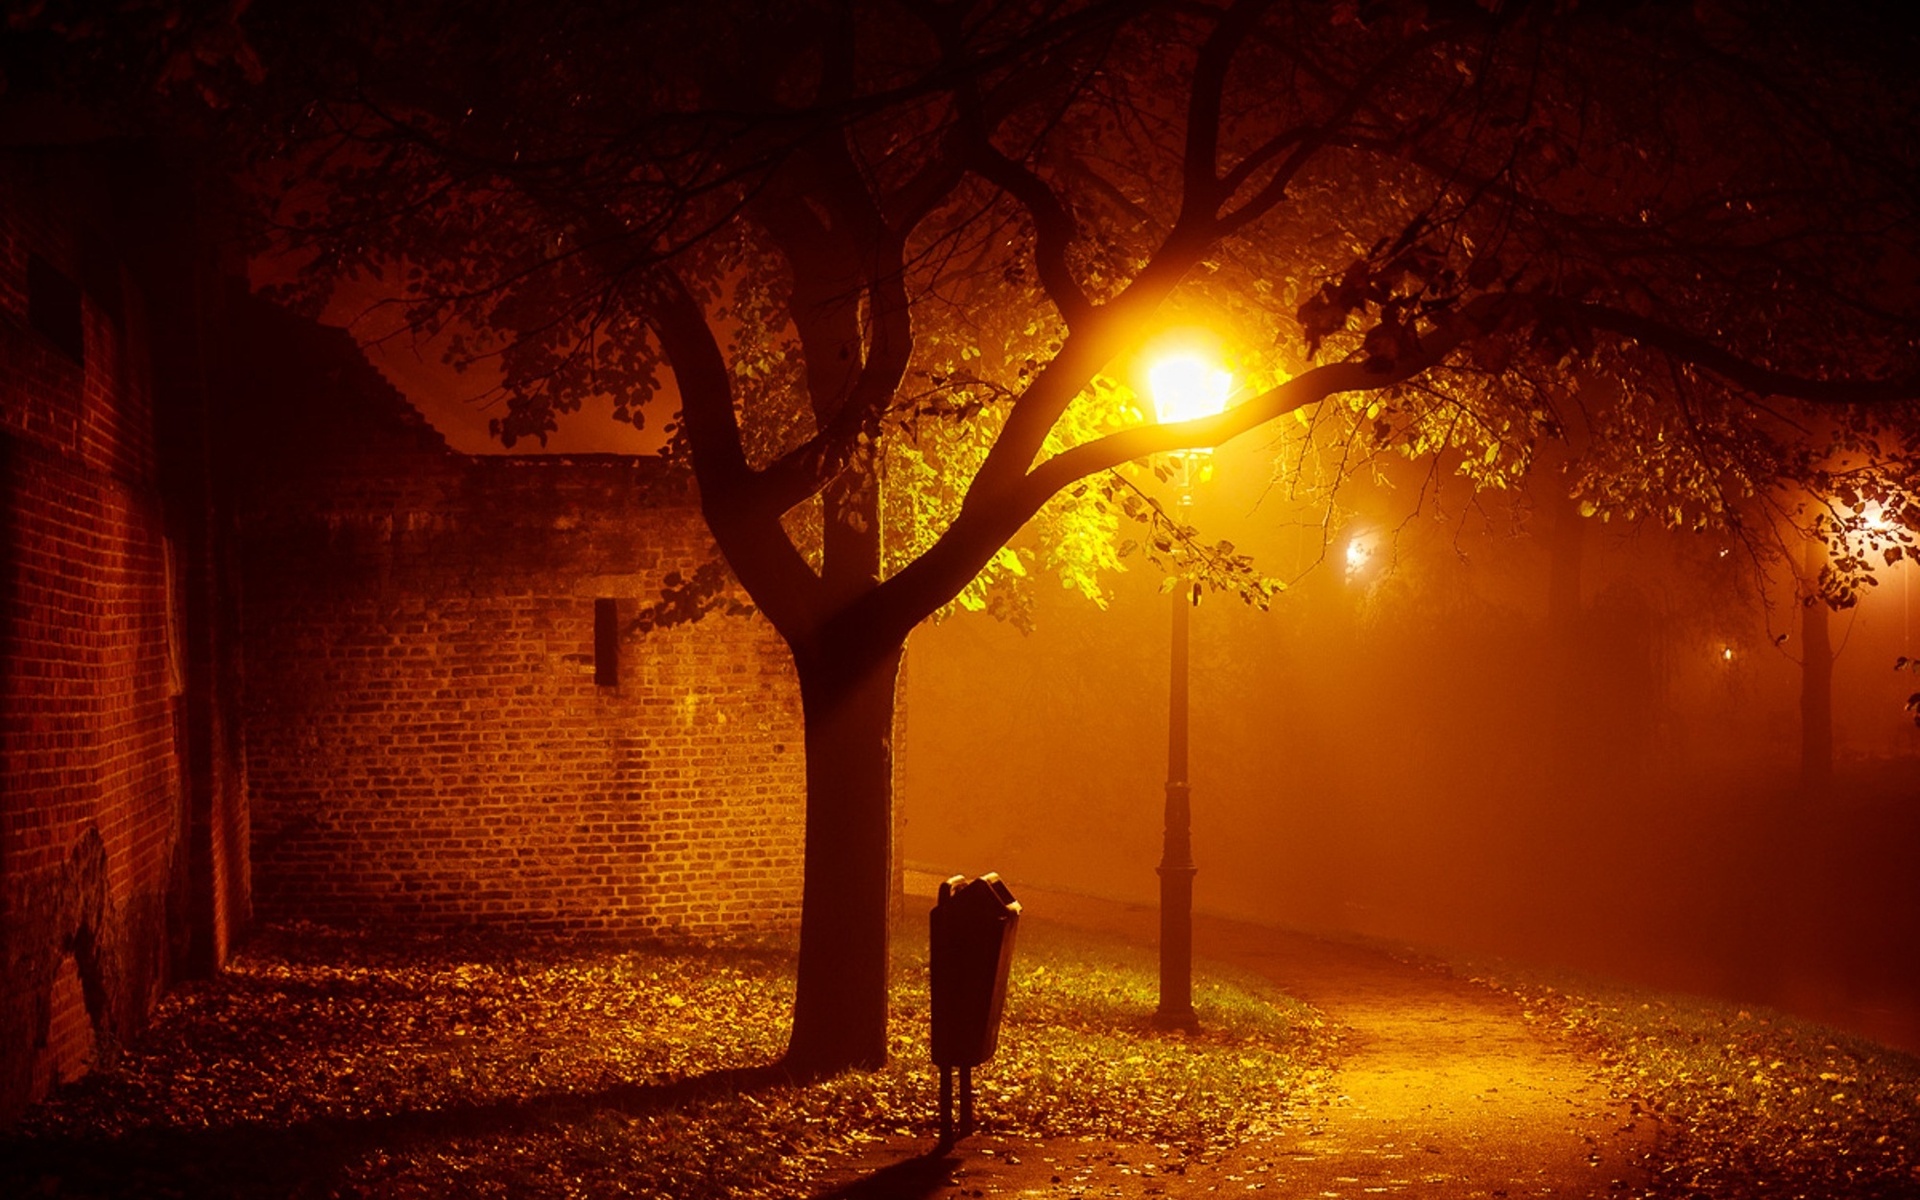 landscapes, Night, Lights, Mood, Autumn, Fall, Seasonal, Fog, Mist, Places, Houses, Buildings, Architecture, Trees, Lamps, Lamp posts, Photography Wallpaper